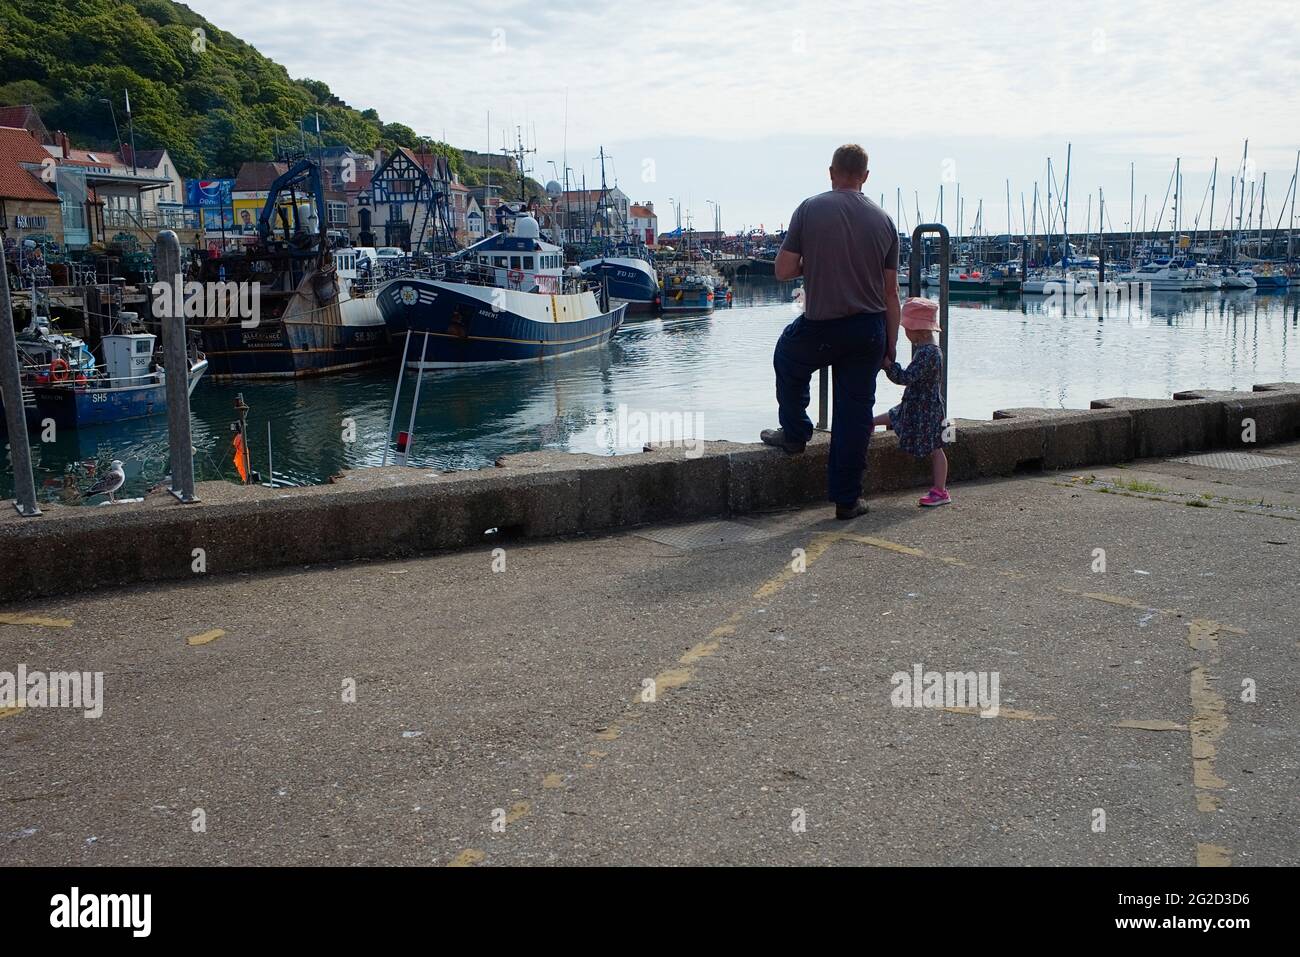 An older man showing a younger girl the fishing boats moored in Scarborough harbour Stock Photo